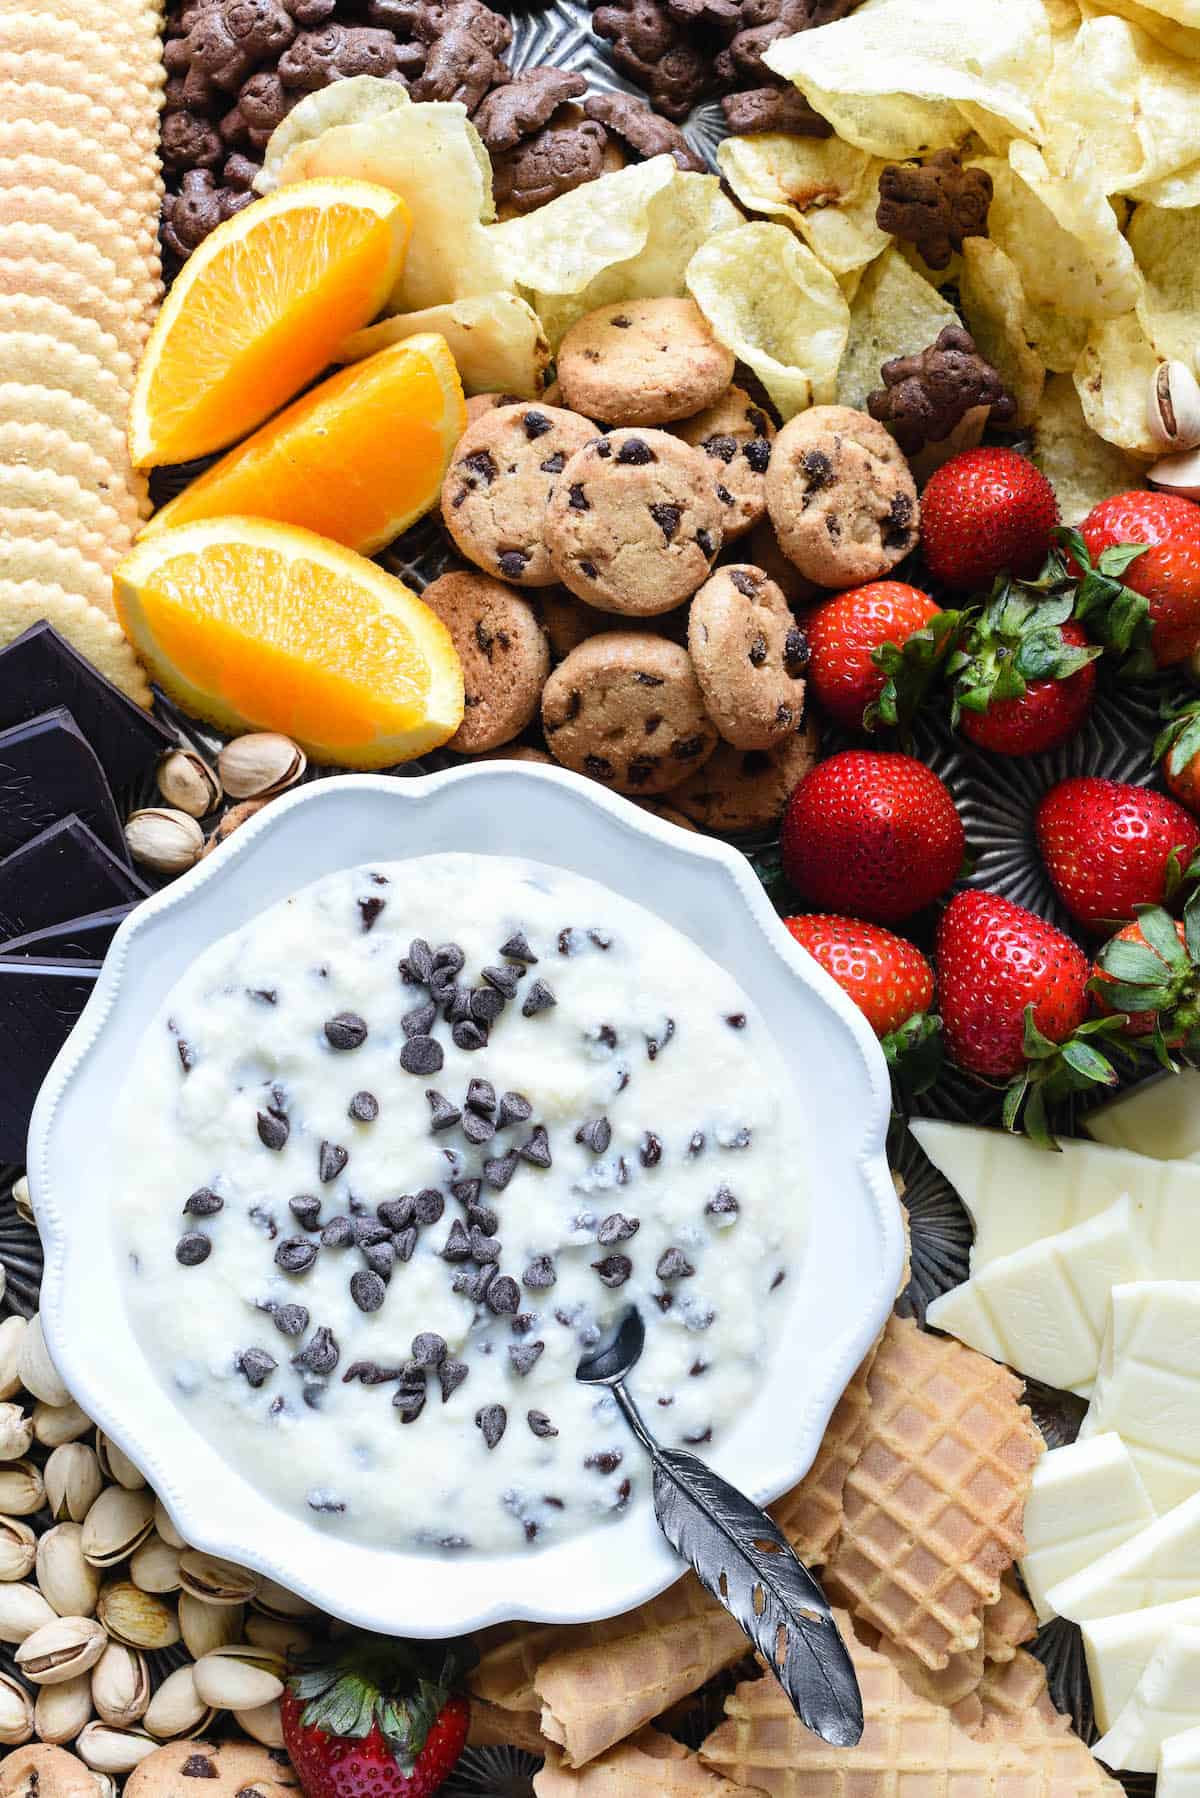 Ricotta and mascarpone mixture topped with mini chocolate chips in fluted white bowl, surrounded by cookies, fruit, chocolate and nuts.